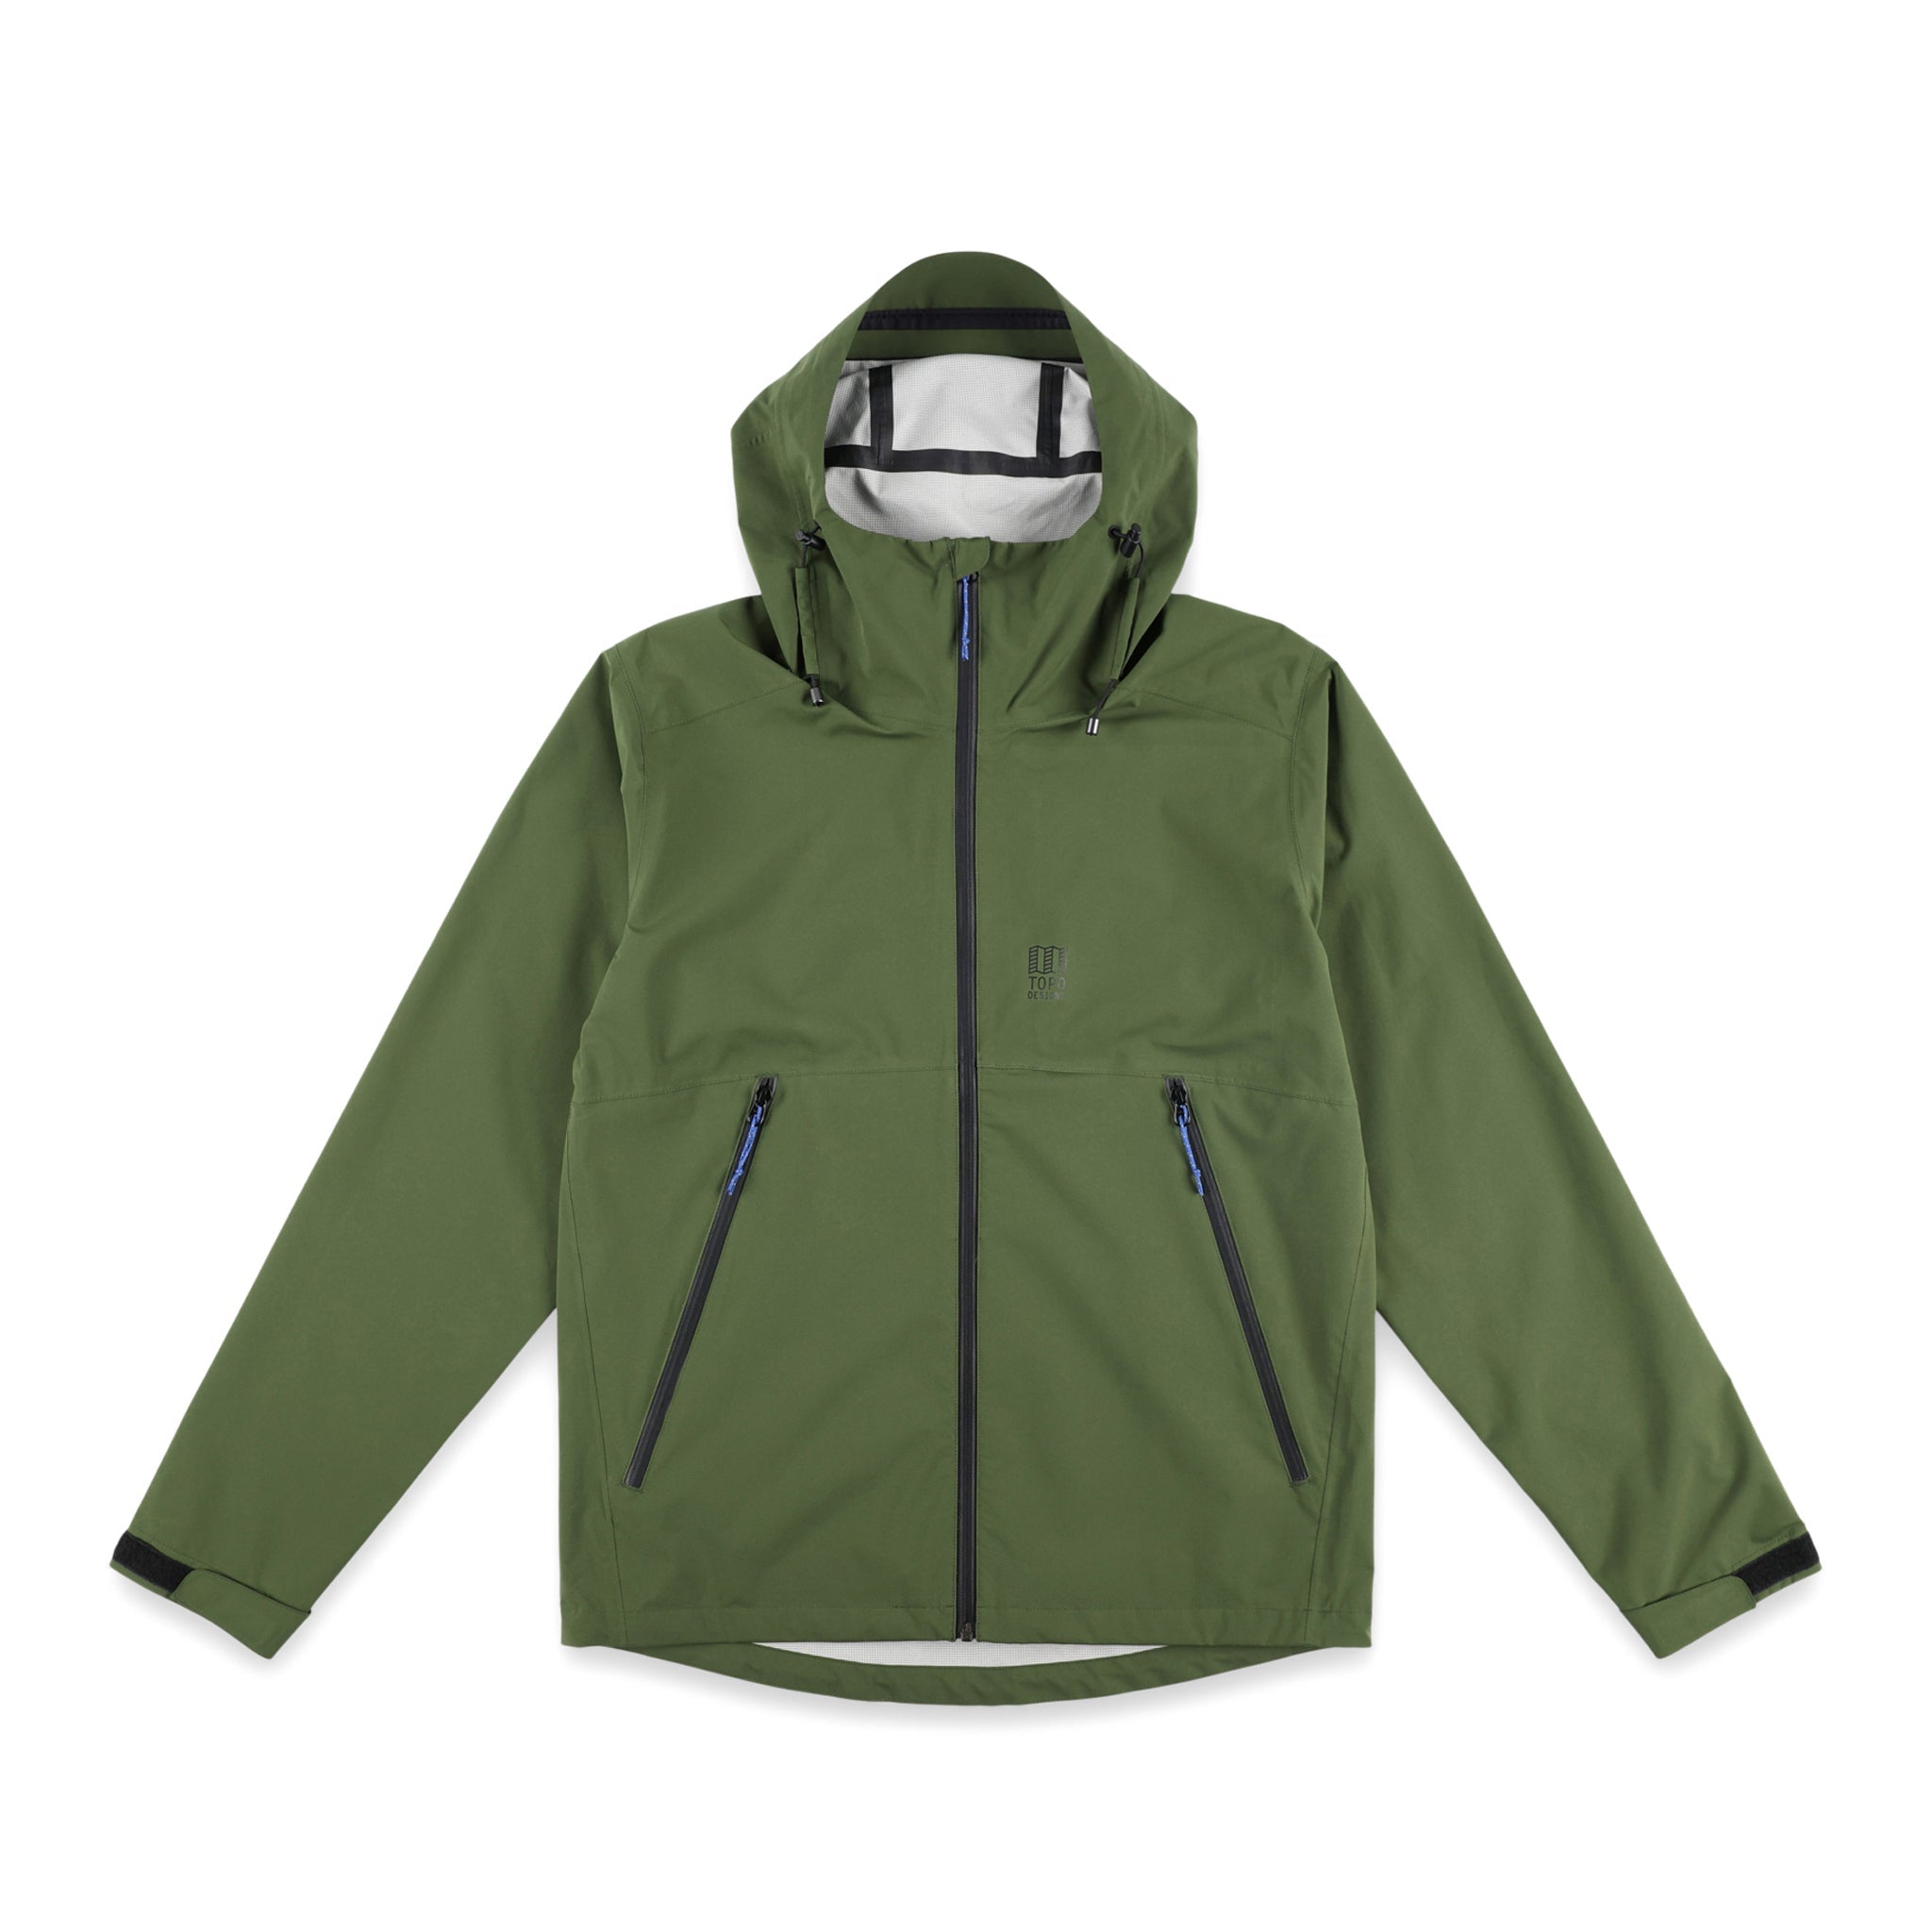 Topo Designs Men's Global Jacket packable 10k waterproof rain shell in recycled "Olive" green polyester.